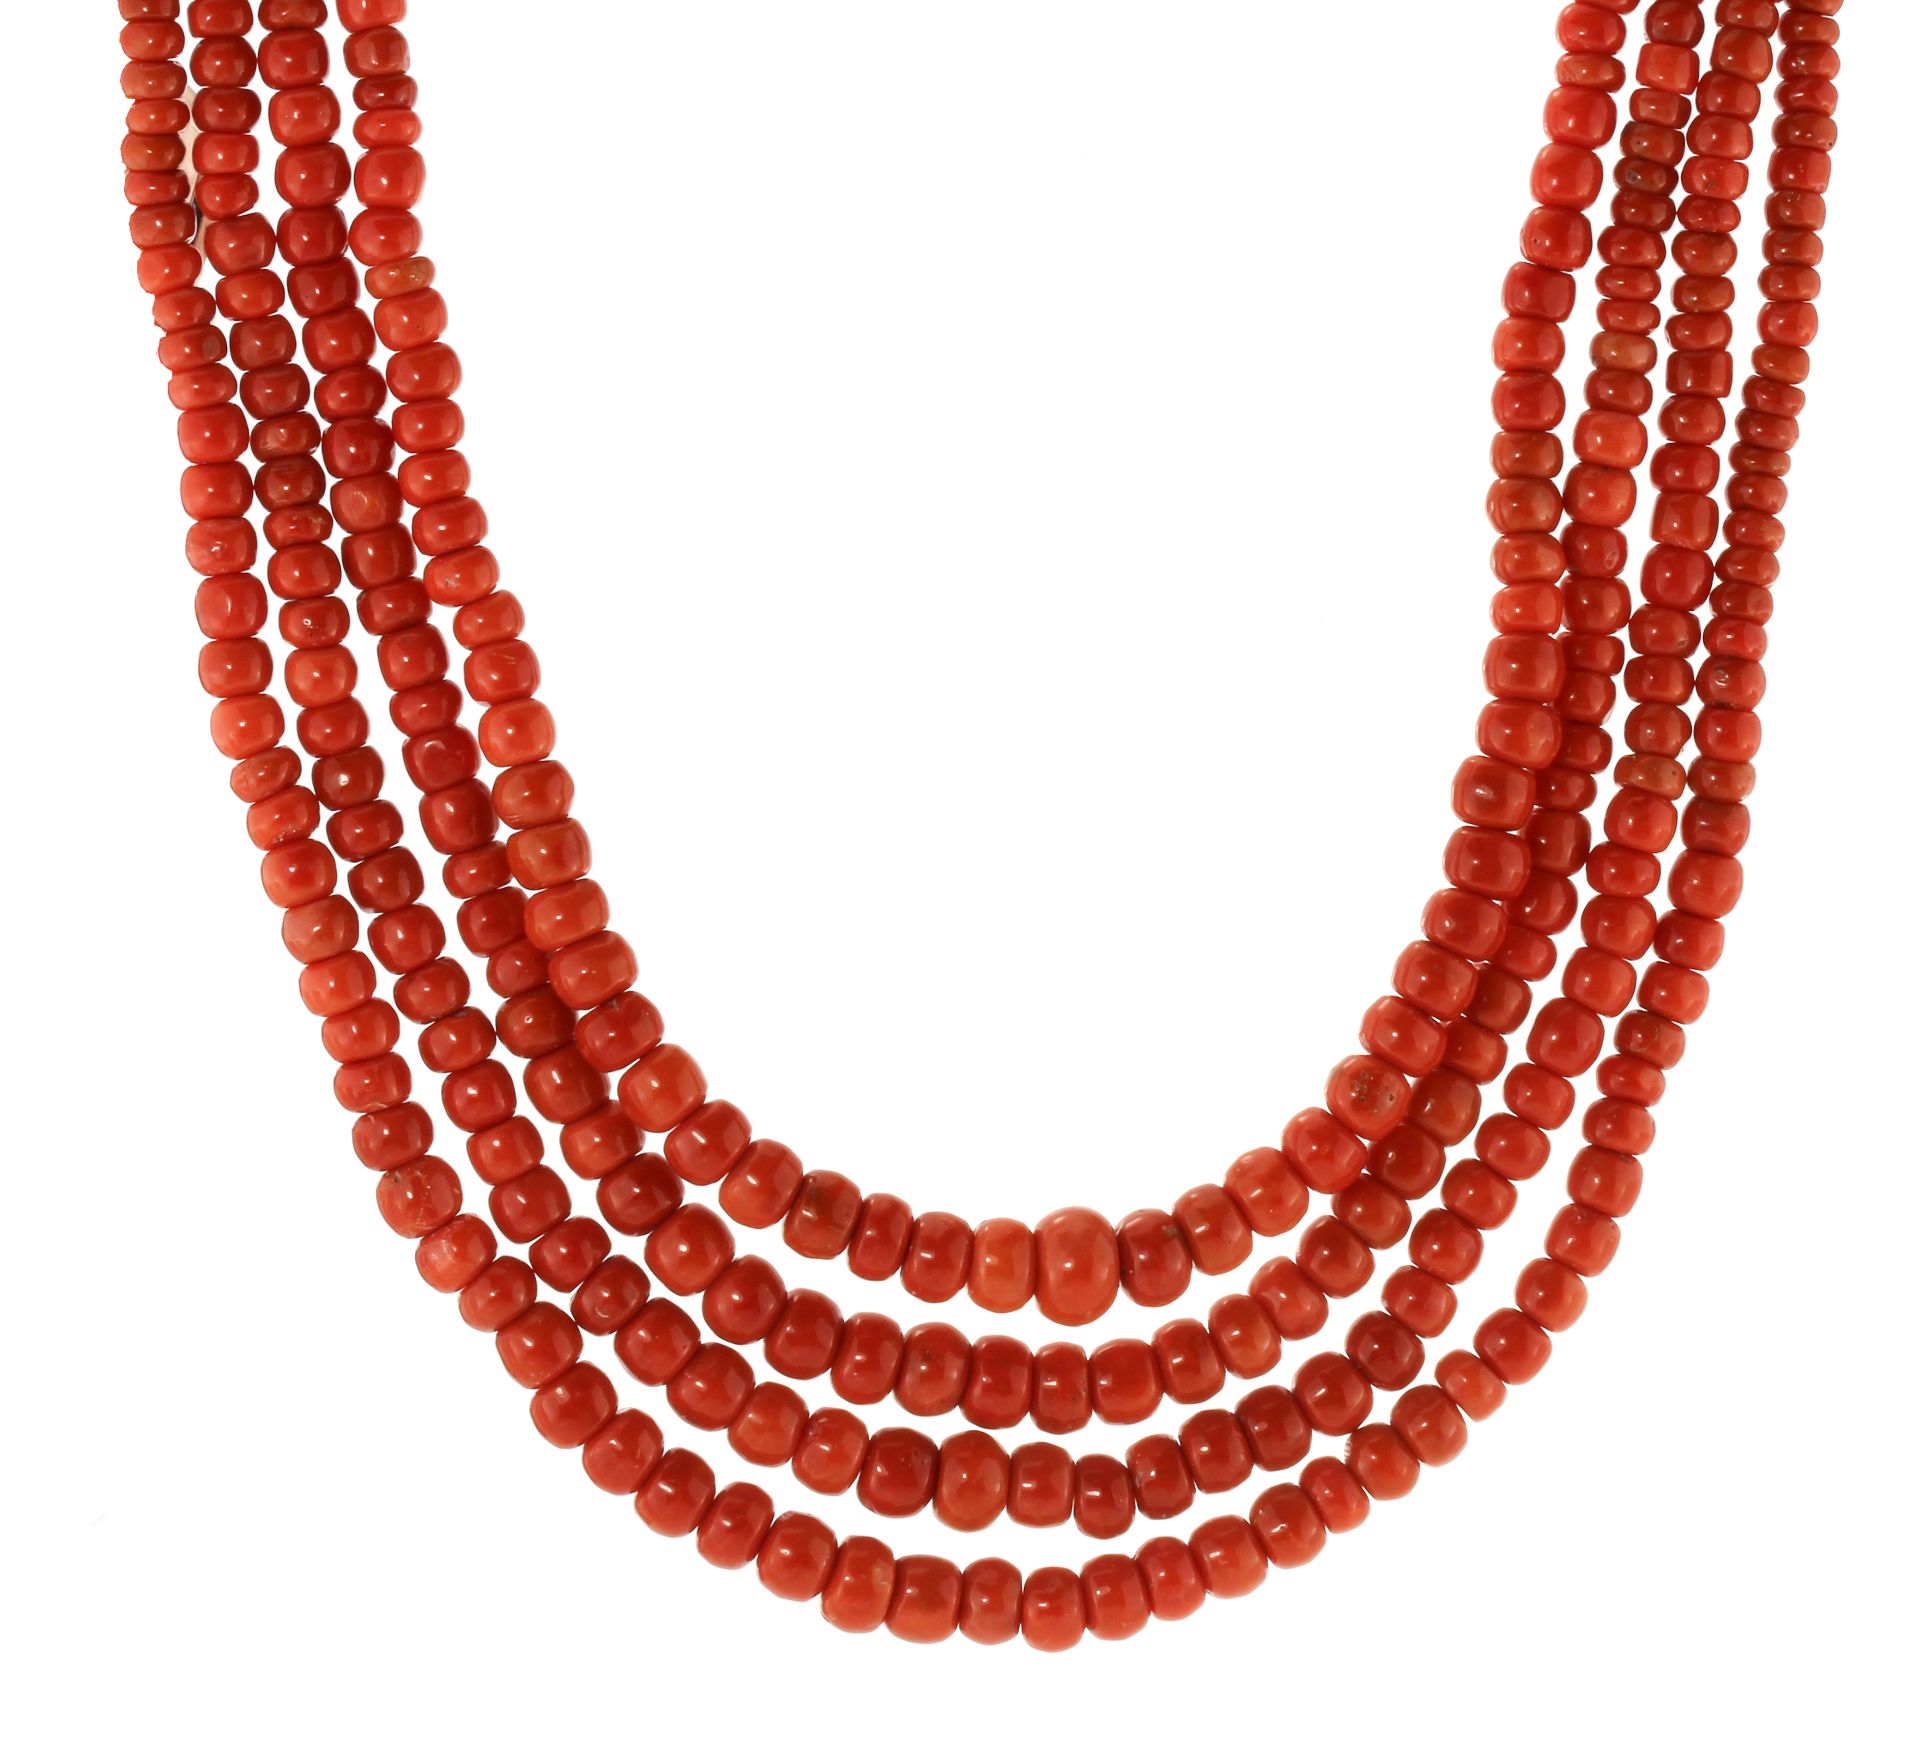 A FOUR STRAND CORAL BEAD NECKLACE comprising four rows of five hundred and ninety seven graduated